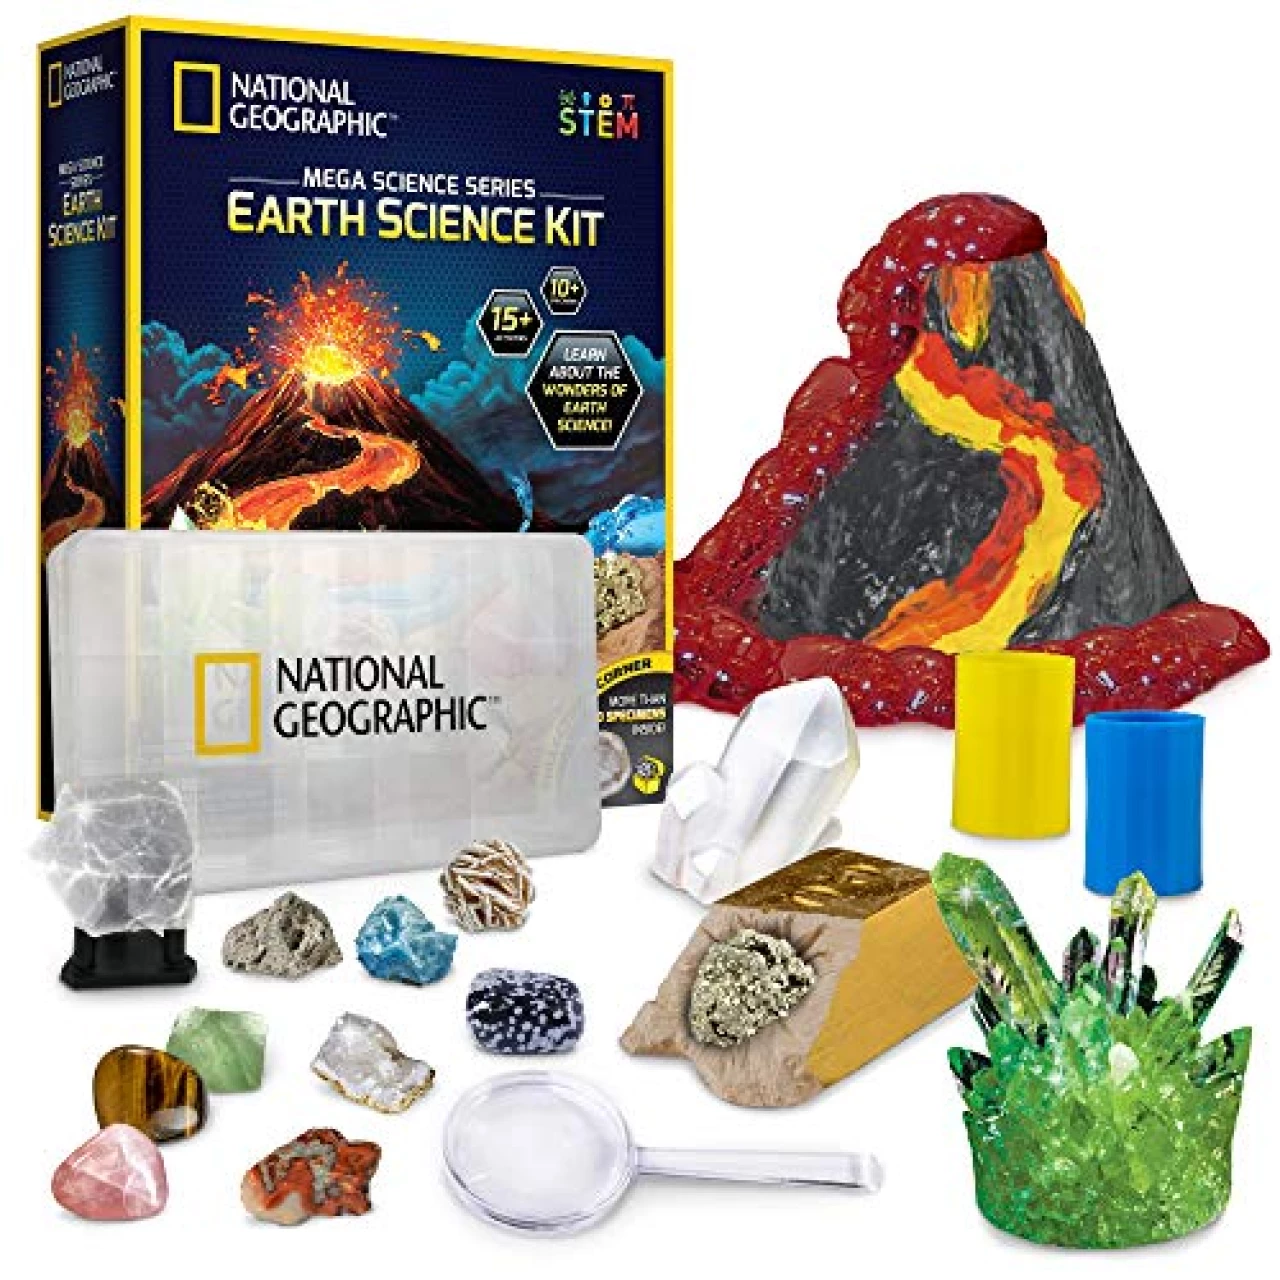 NATIONAL GEOGRAPHIC Earth Science Kit - Over 15 Science Experiments for Kids, Crystal Growing Kit, Volcano Science Kit, Dig Kits &amp; Gemstones, STEM Project Toy for Boys and Girls (Amazon Exclusive)